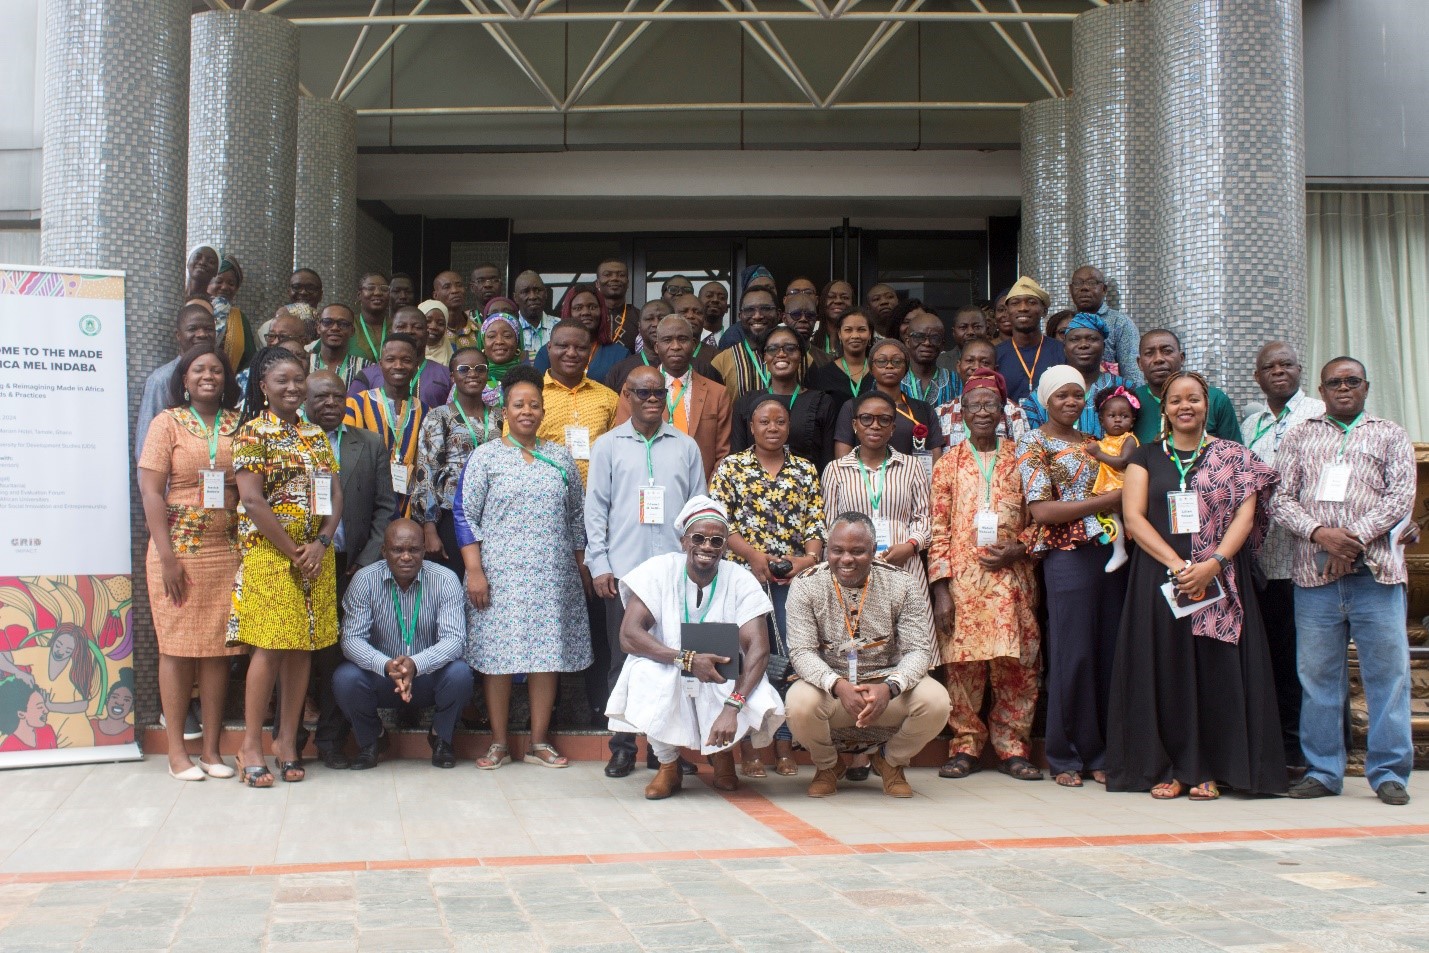 The University for Development Studies in Collaboration with the MasterCard Foundation Pioneers Decolonized Development Approaches in Africa in a 3-day Workshop